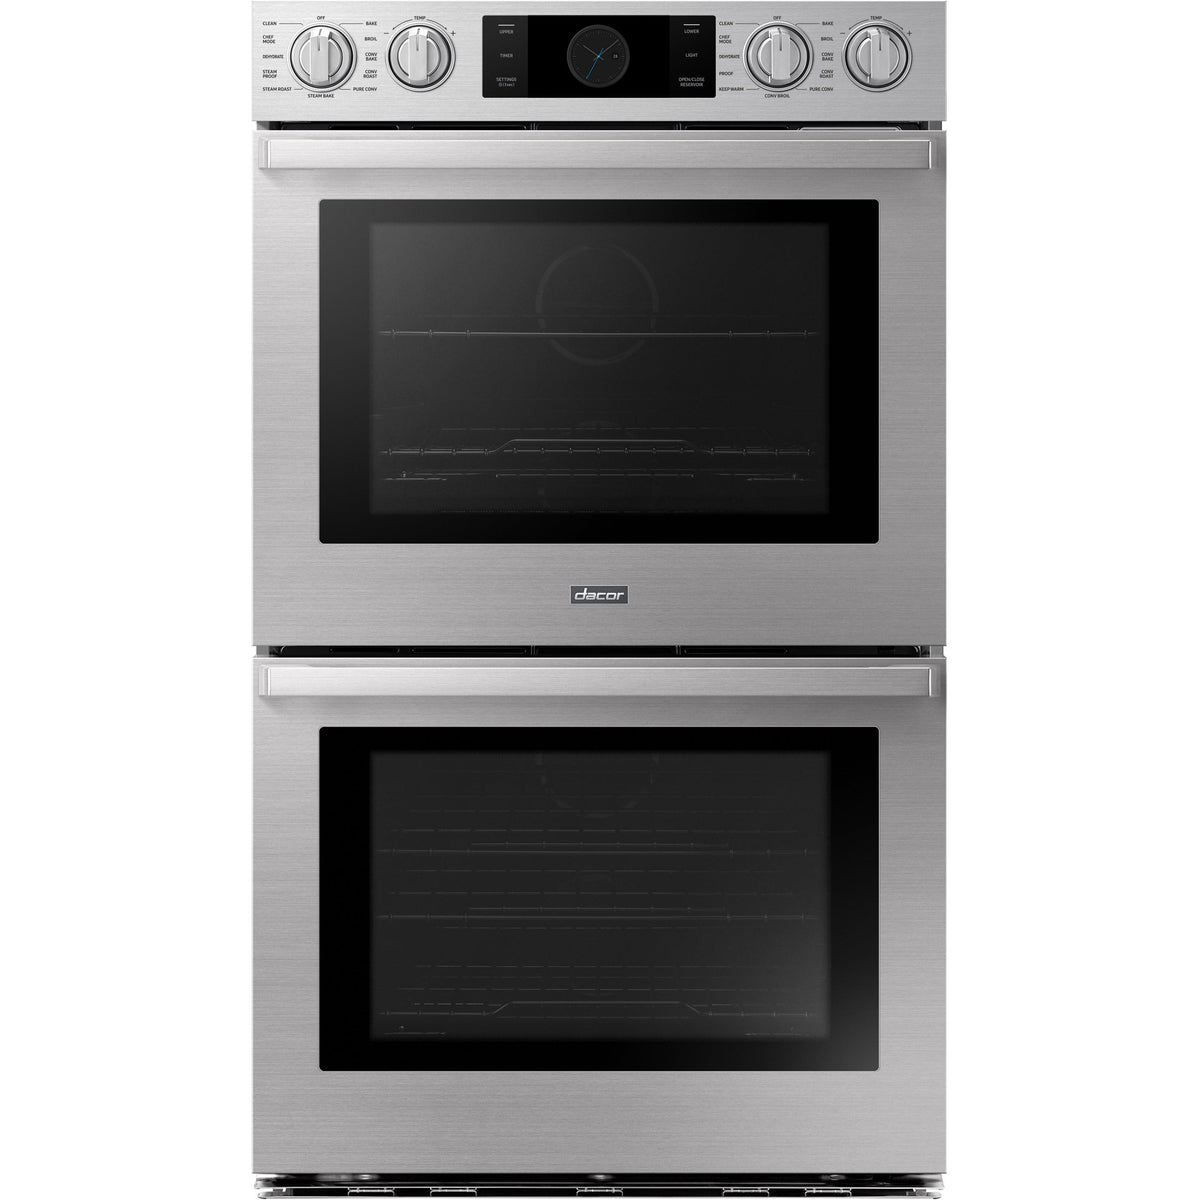 30-inch, 10.2 cu.ft. Built-in Double Wall Oven with Convection Technology DOB30P977DS/DA IMAGE 1